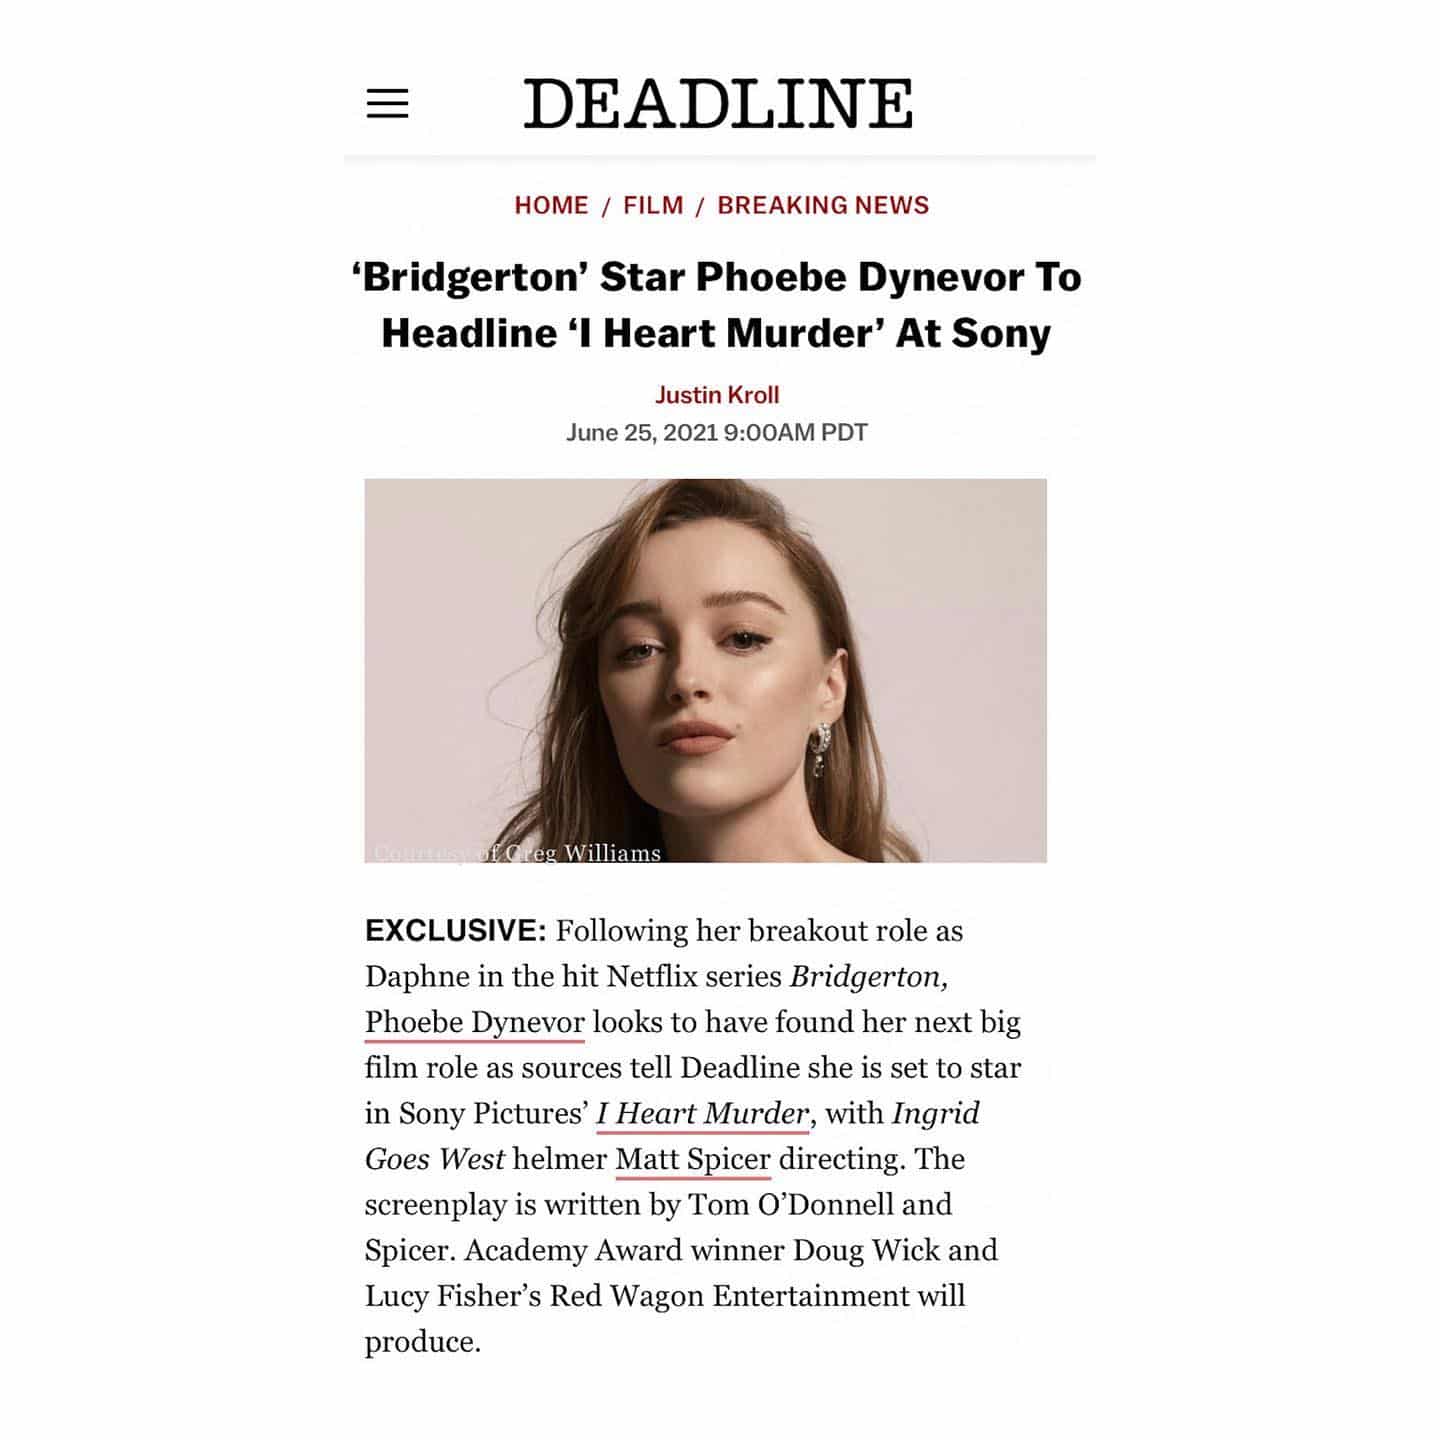 @phoebedynevor to star in I HEART MURDER for @sonypictures 
.
.
.
.
.
.
.